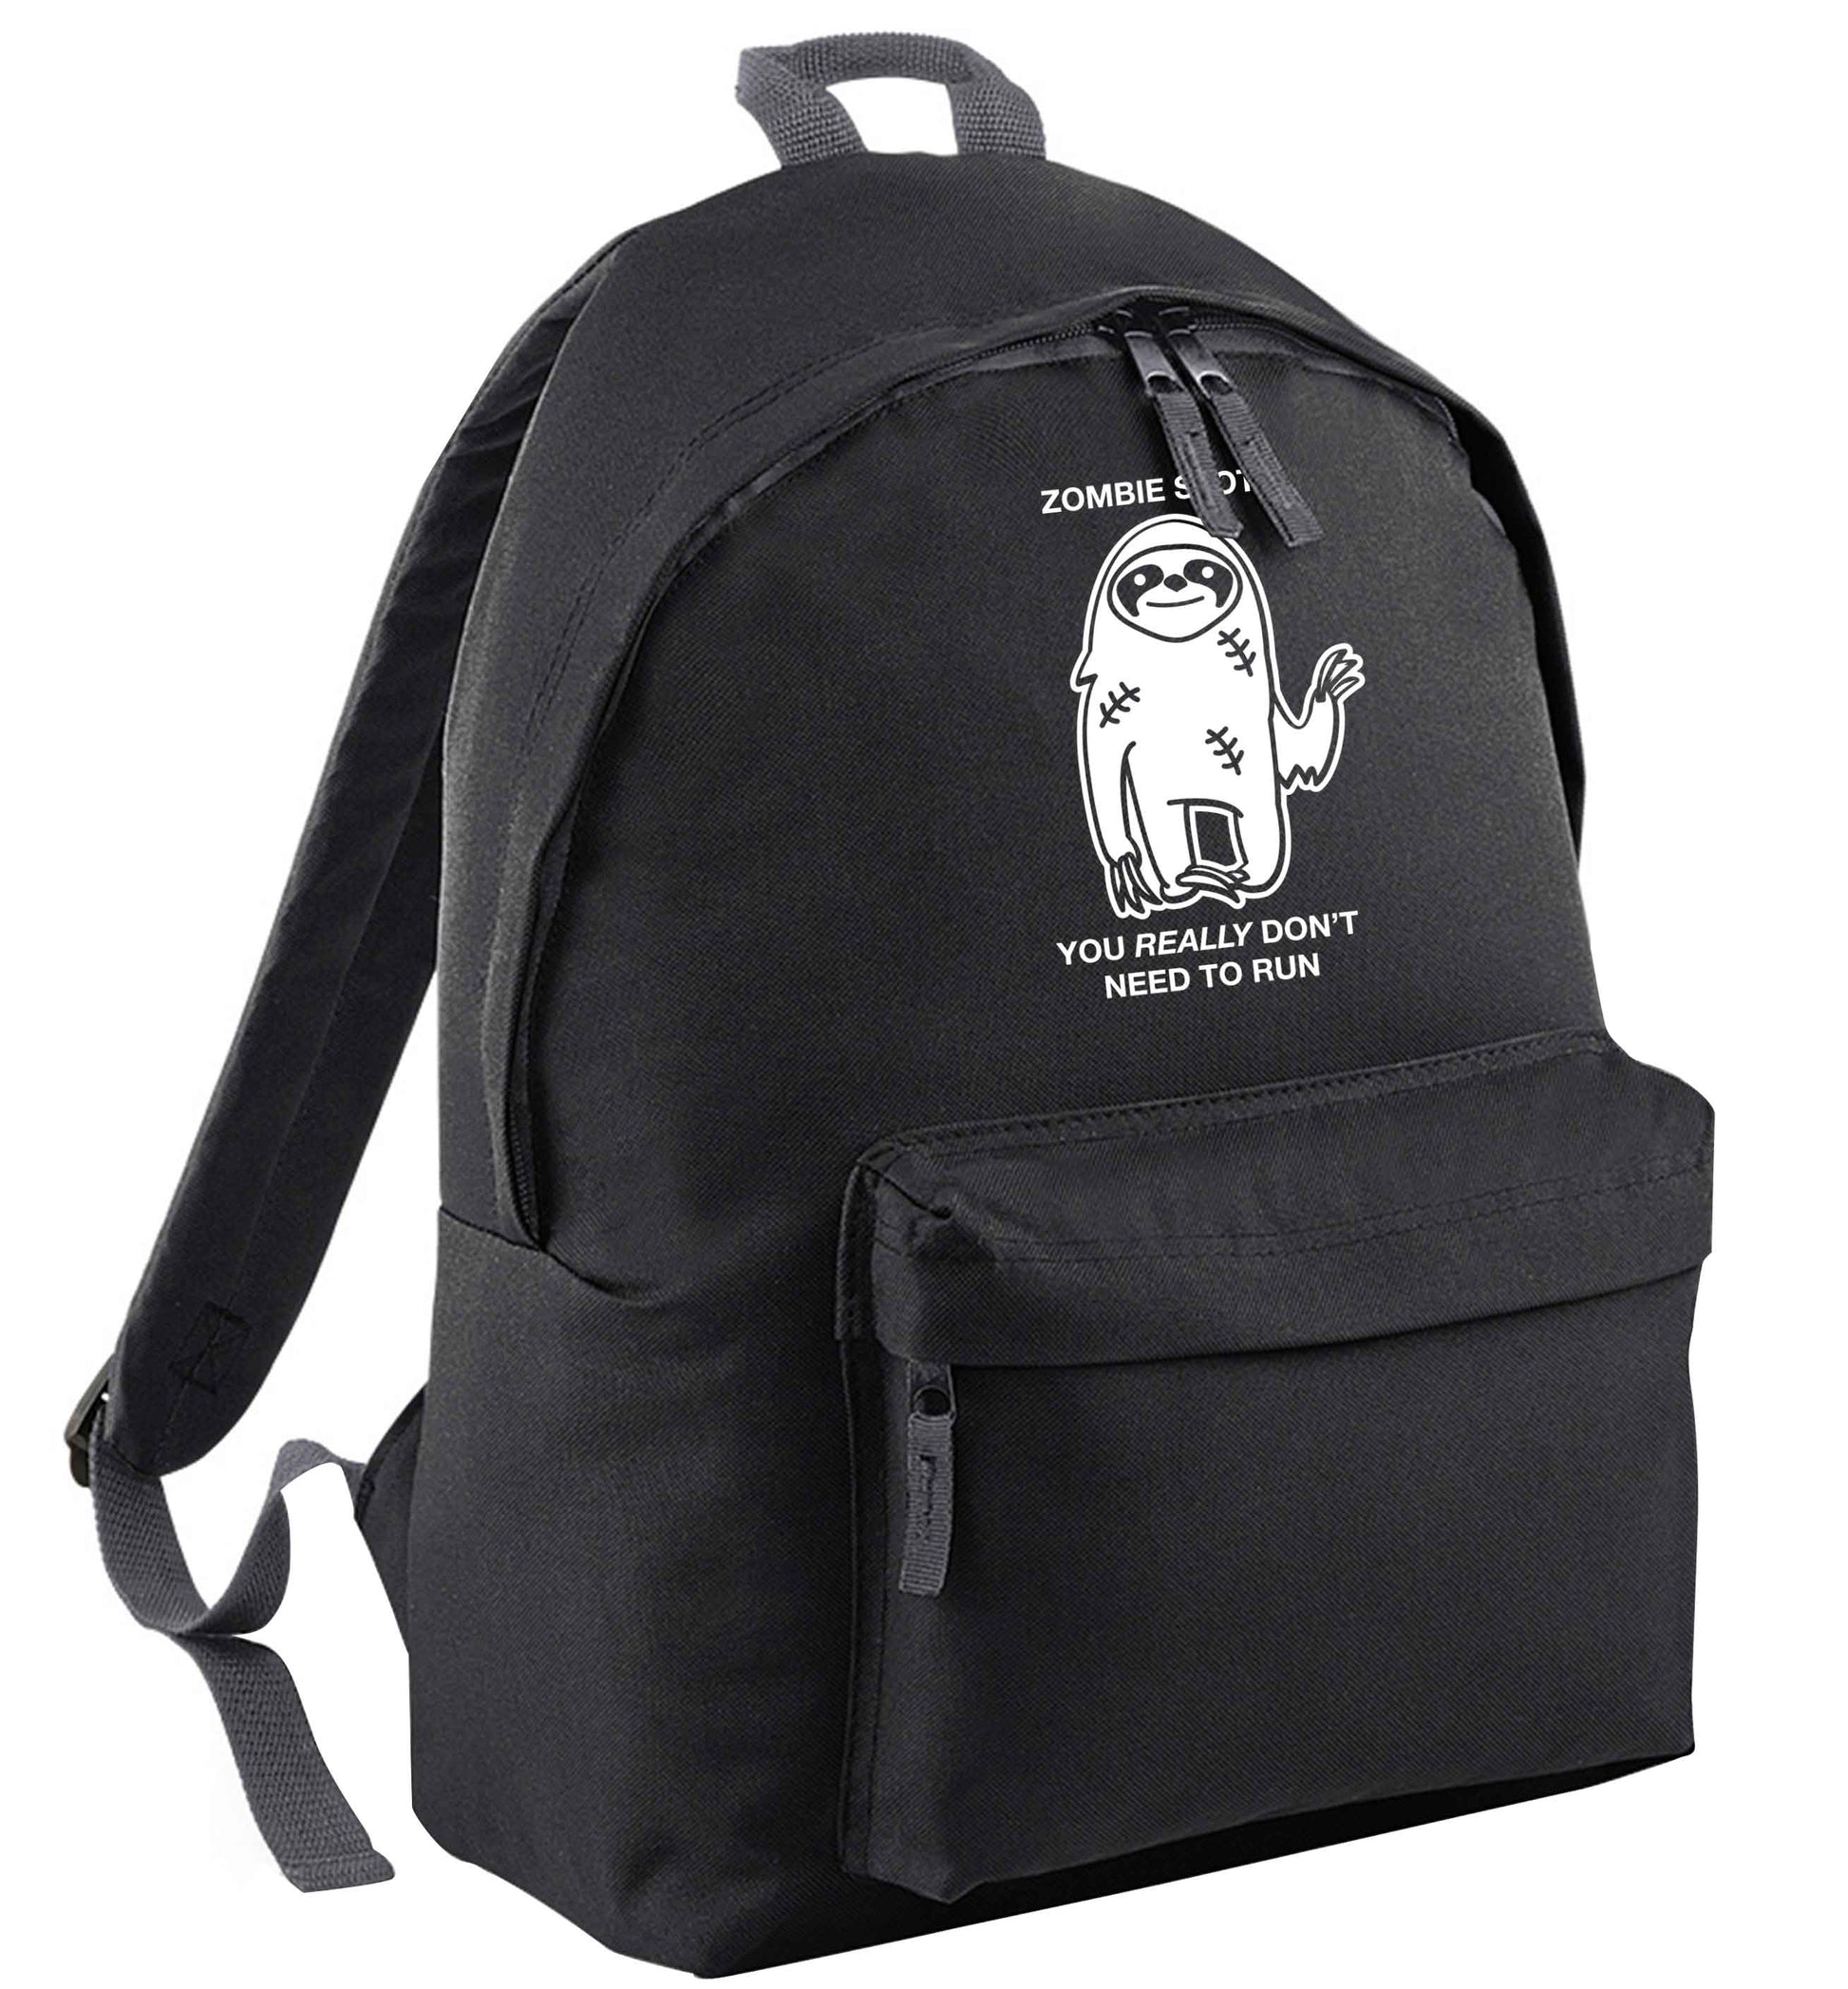 Zombie sloth you really don't need to run | Children's backpack